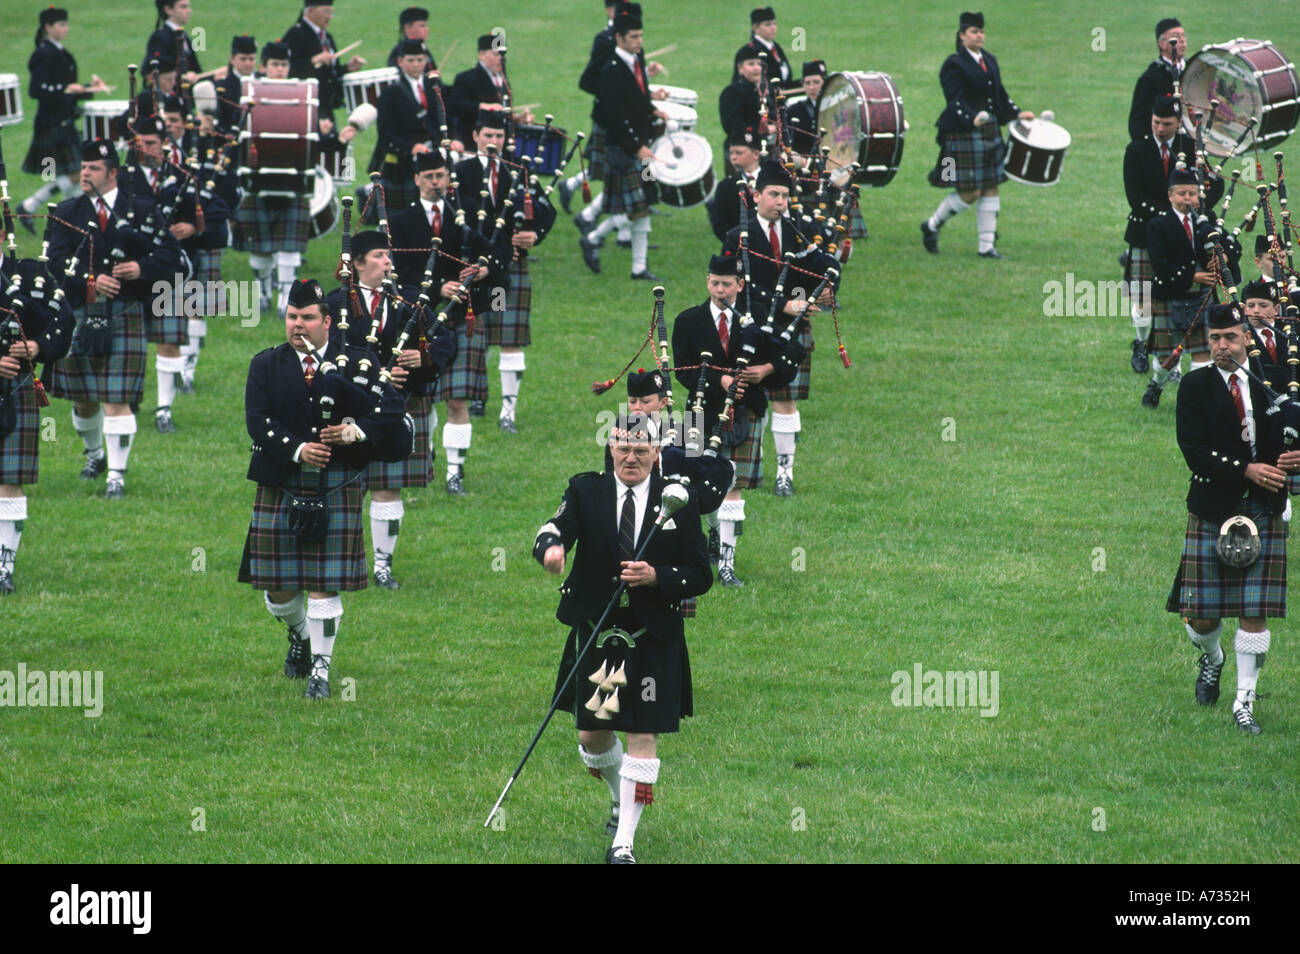 Scottish bagpipe music playing in Stirling, Scotland Stock Photo